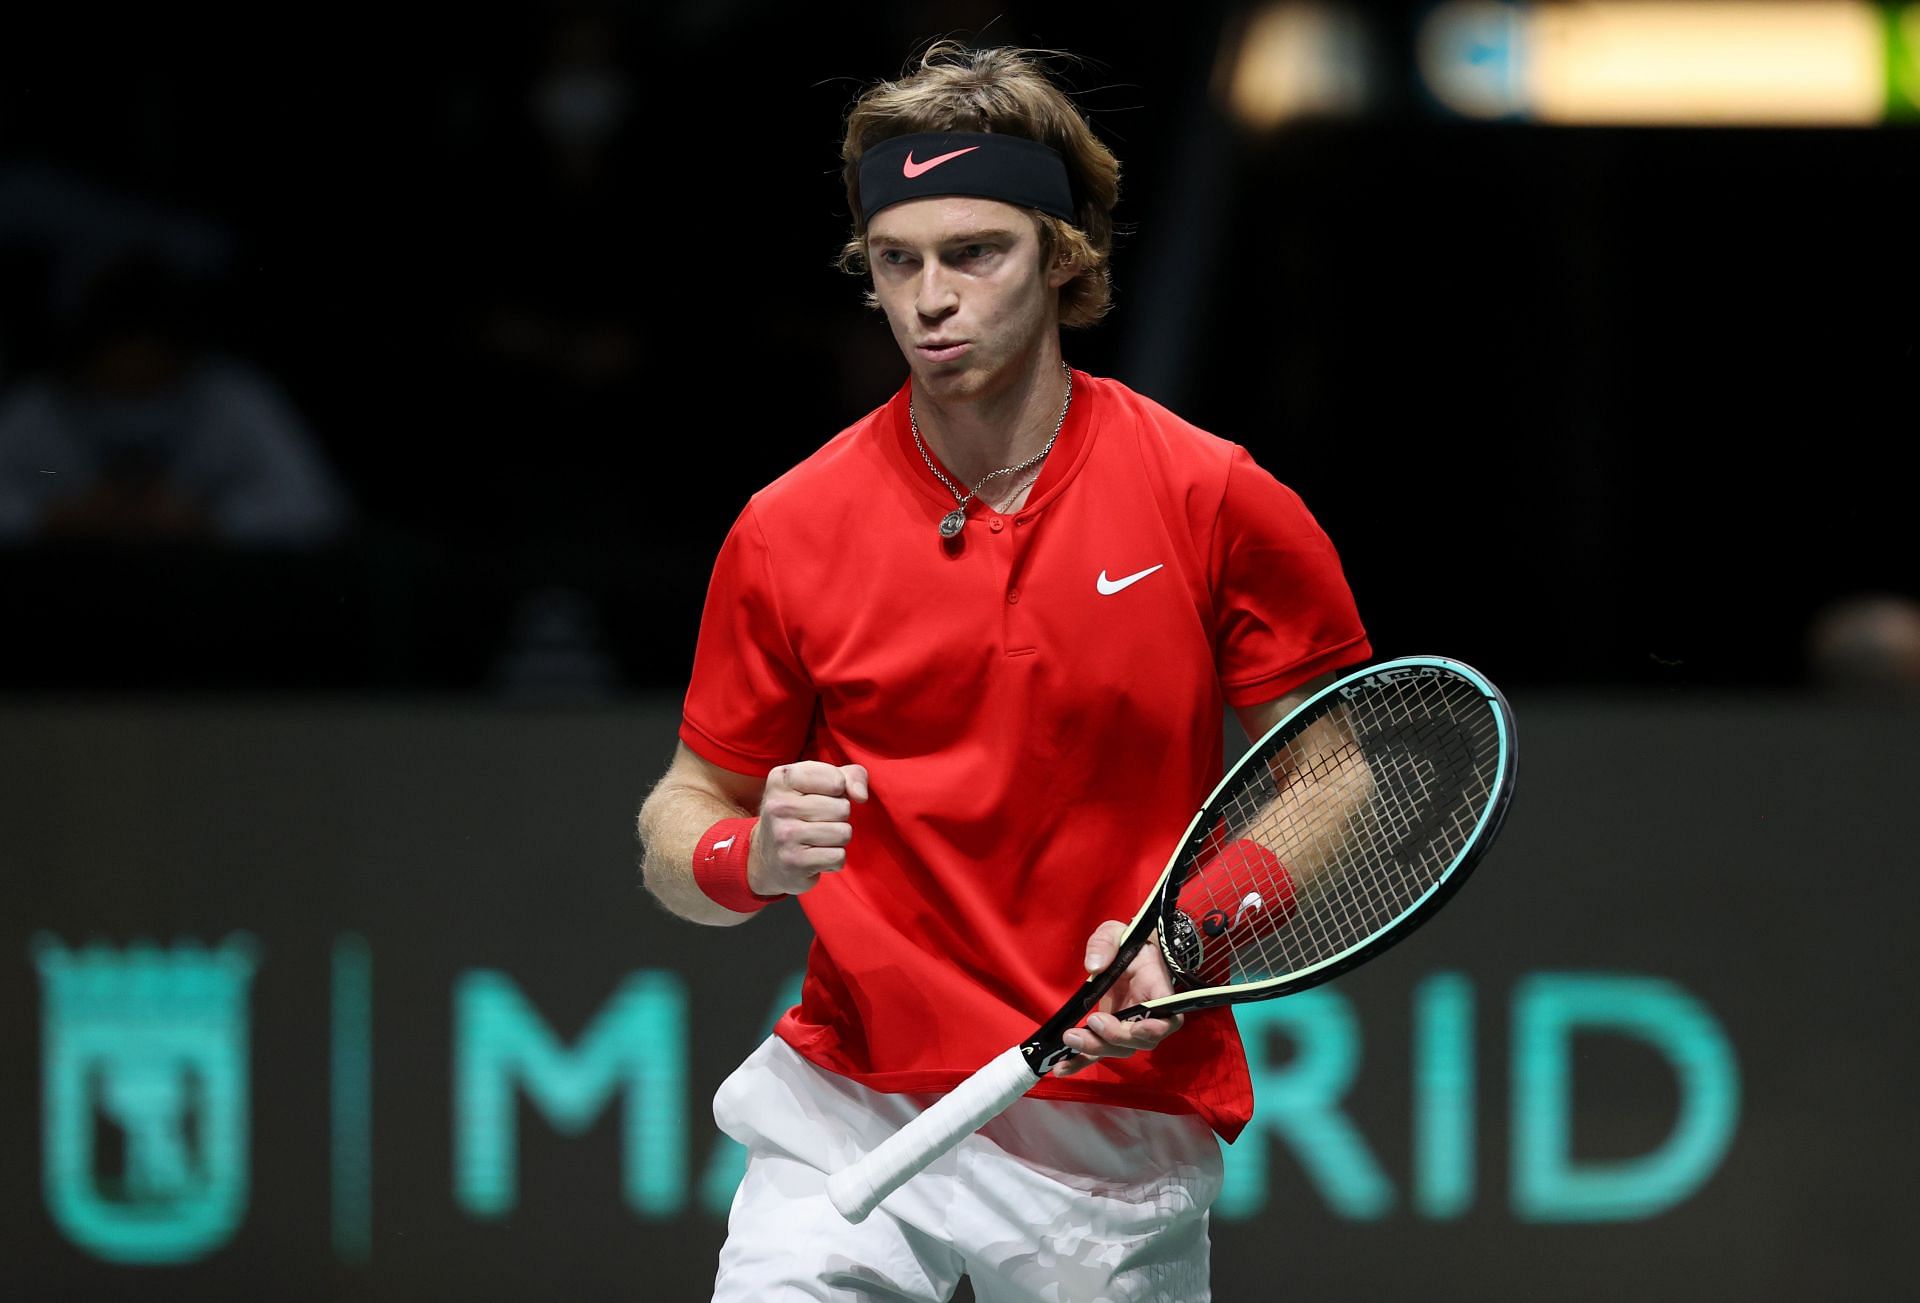 The World No. 7 at the 2021 Davis Cup Finals